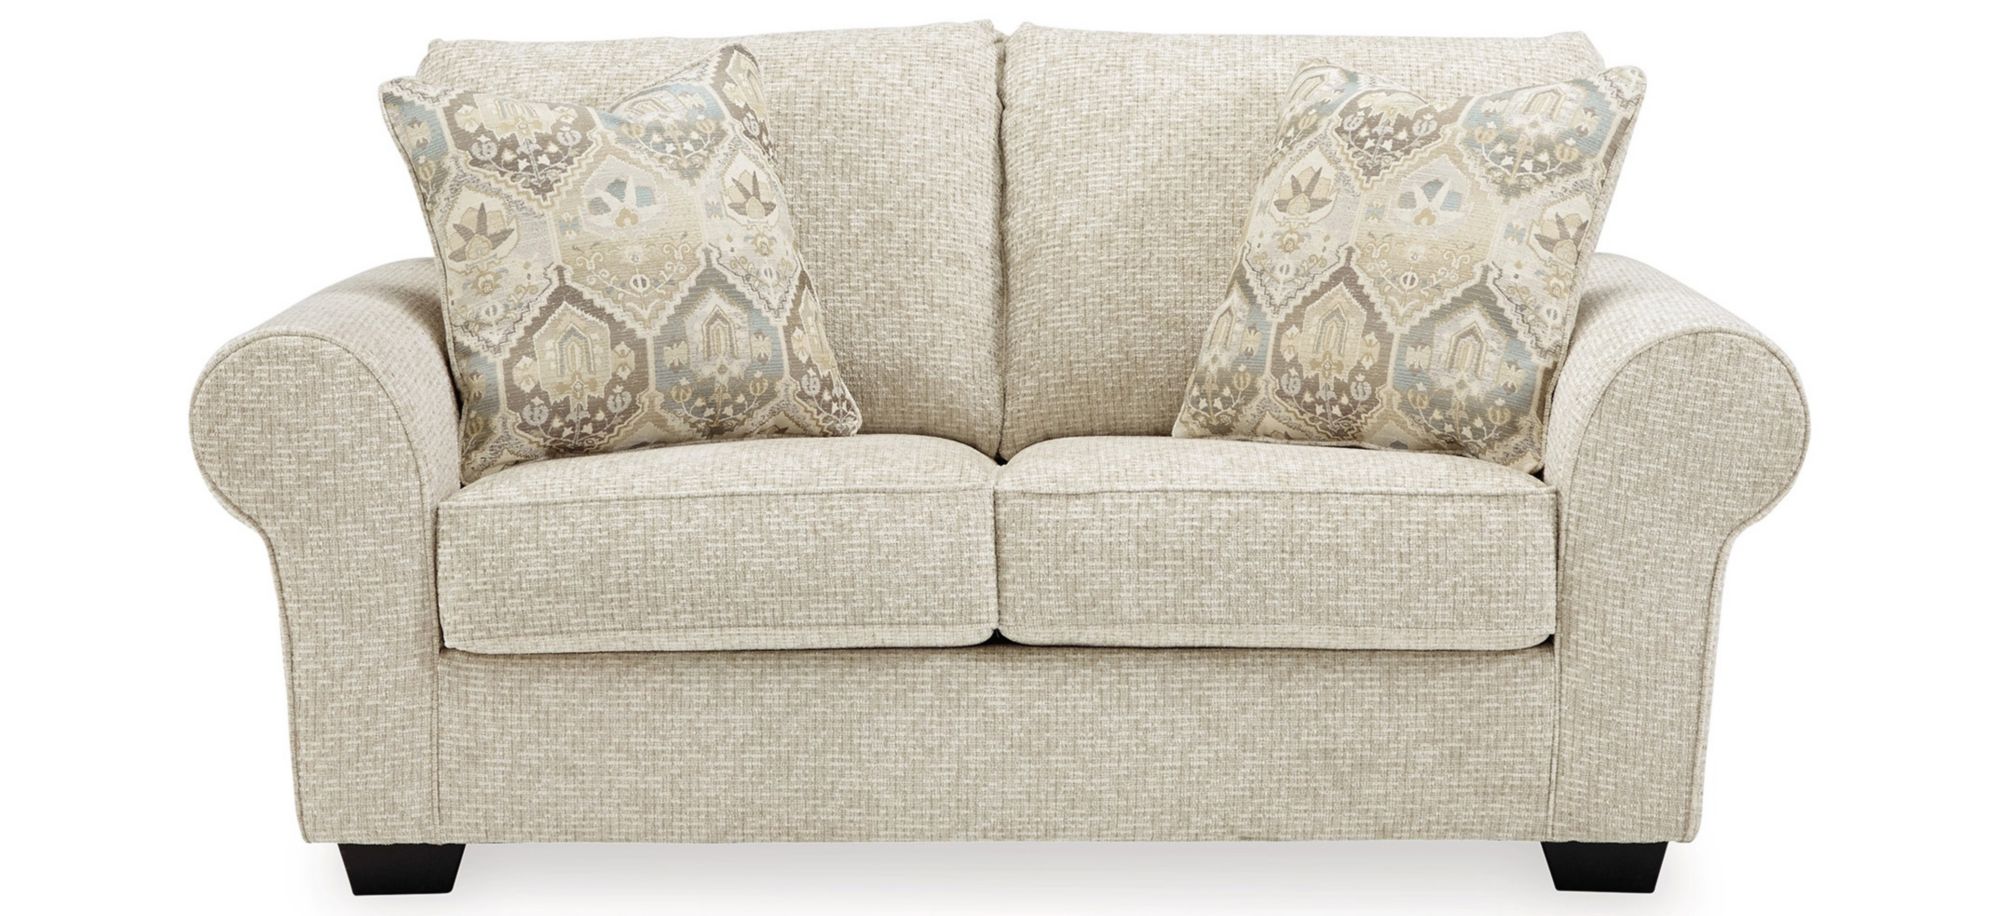 Haisley Loveseat in Ivory by Ashley Furniture